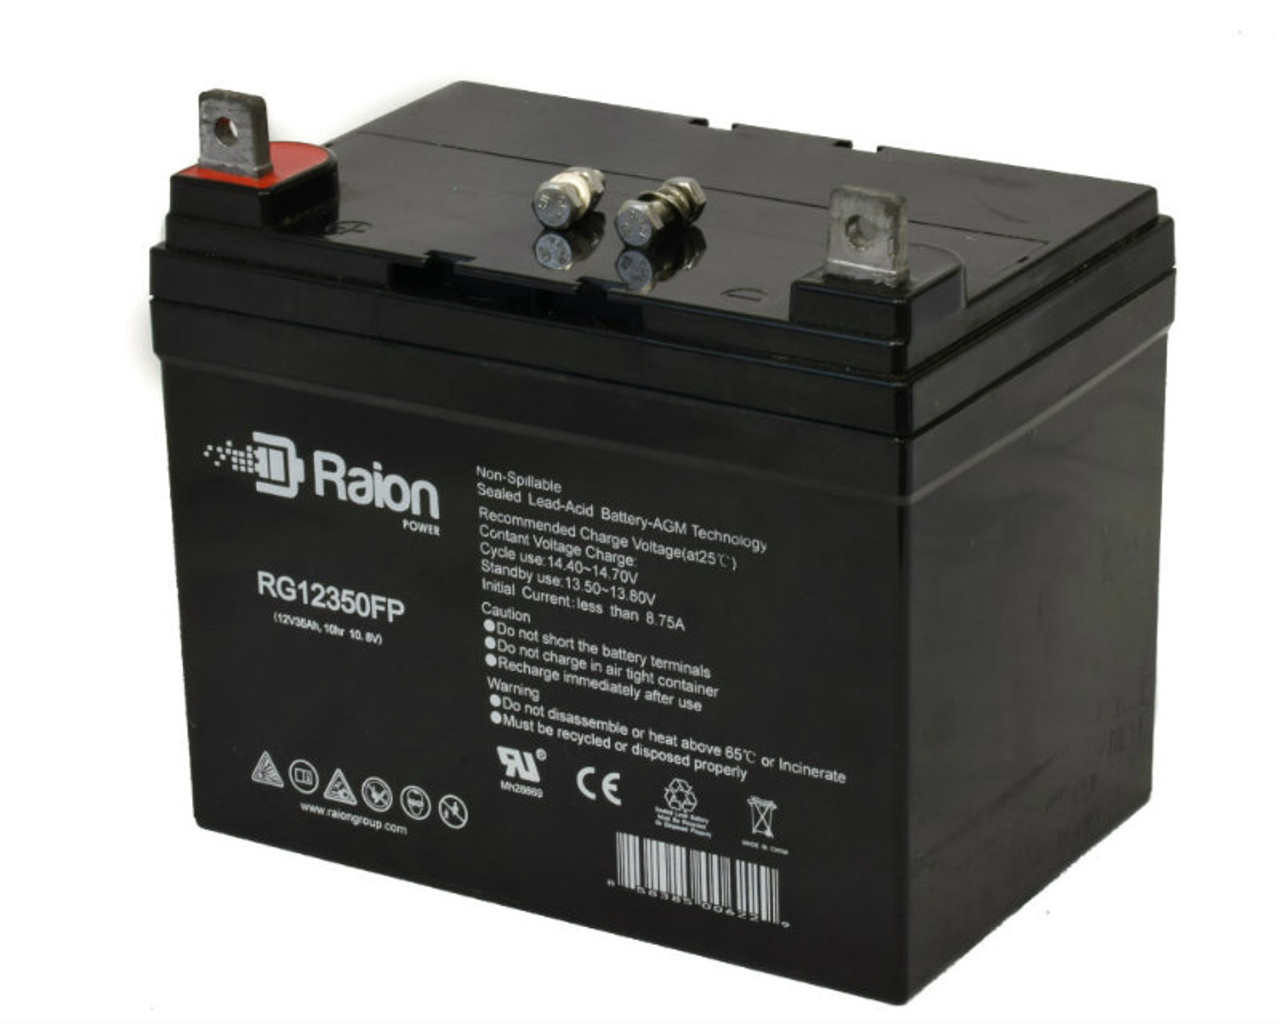 Raion Power Replacement 12V 35Ah Battery for Yard Pro HDC 12538 - 1 Pack